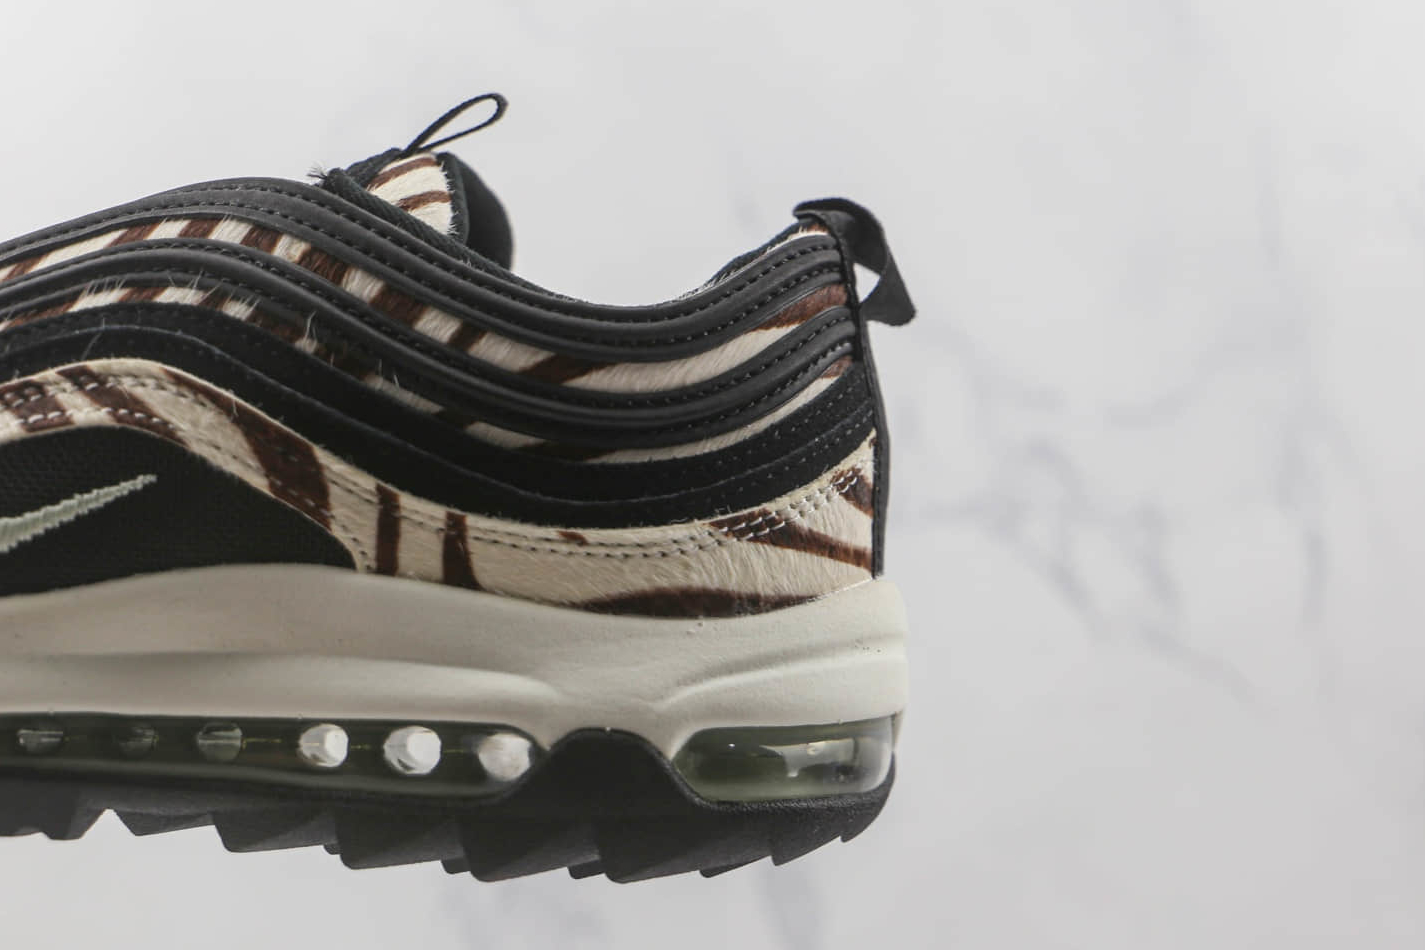 Nike Air Max 97 Golf NRG 'Zebra' DH1313-001 - Stylish and Performance-Driven Footwear | Shop now!